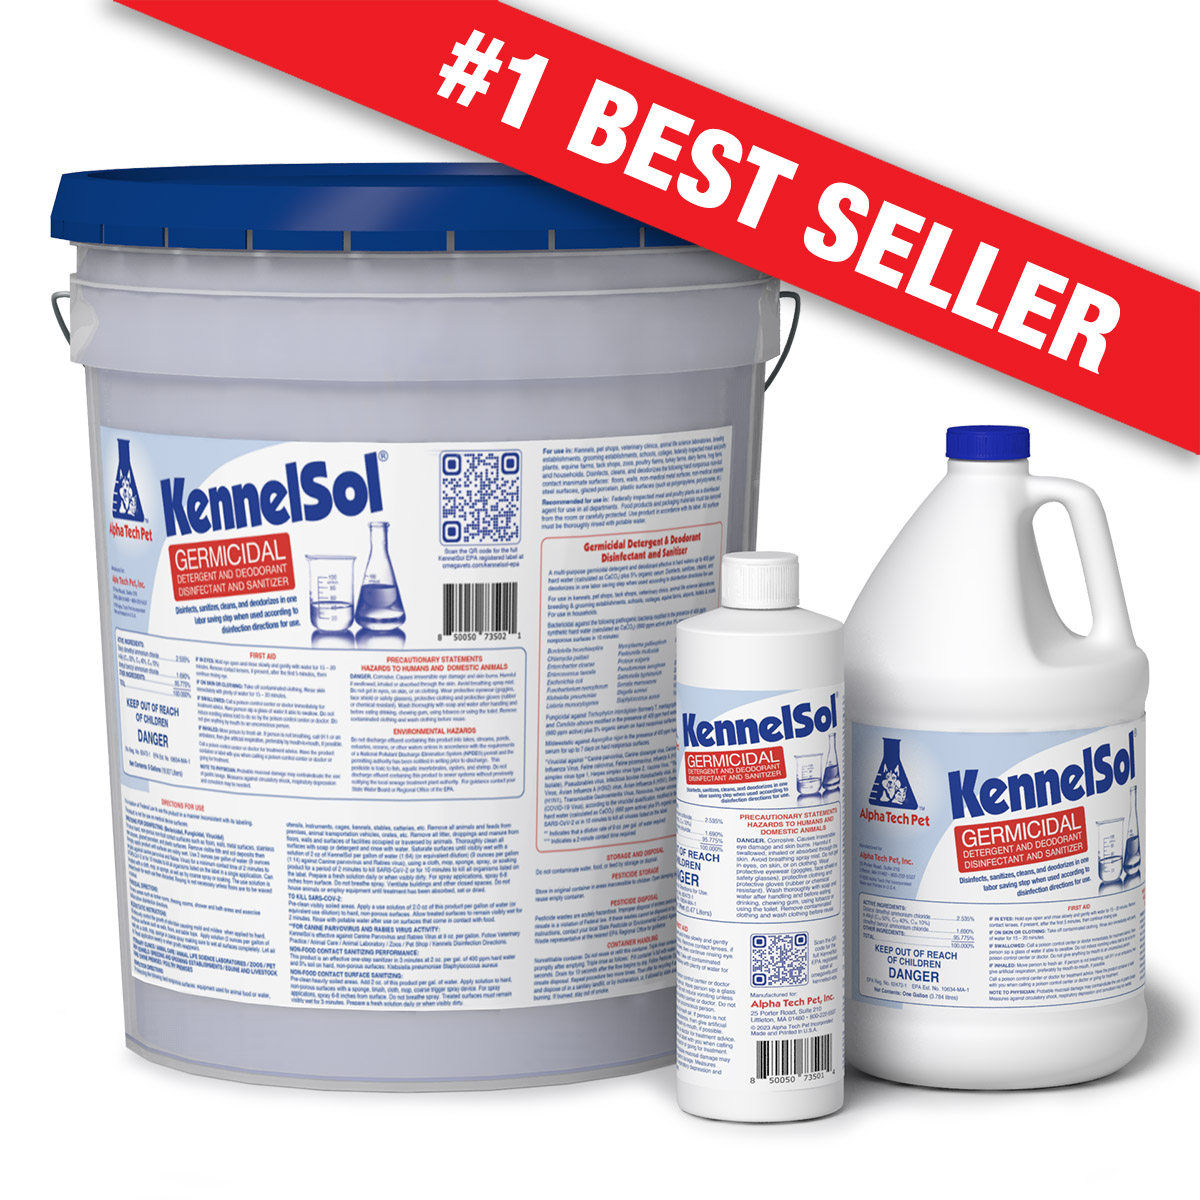 KennelSol Germicidal Cleaner & Disinfectant - Pint, 1, 5, 15 Gallon